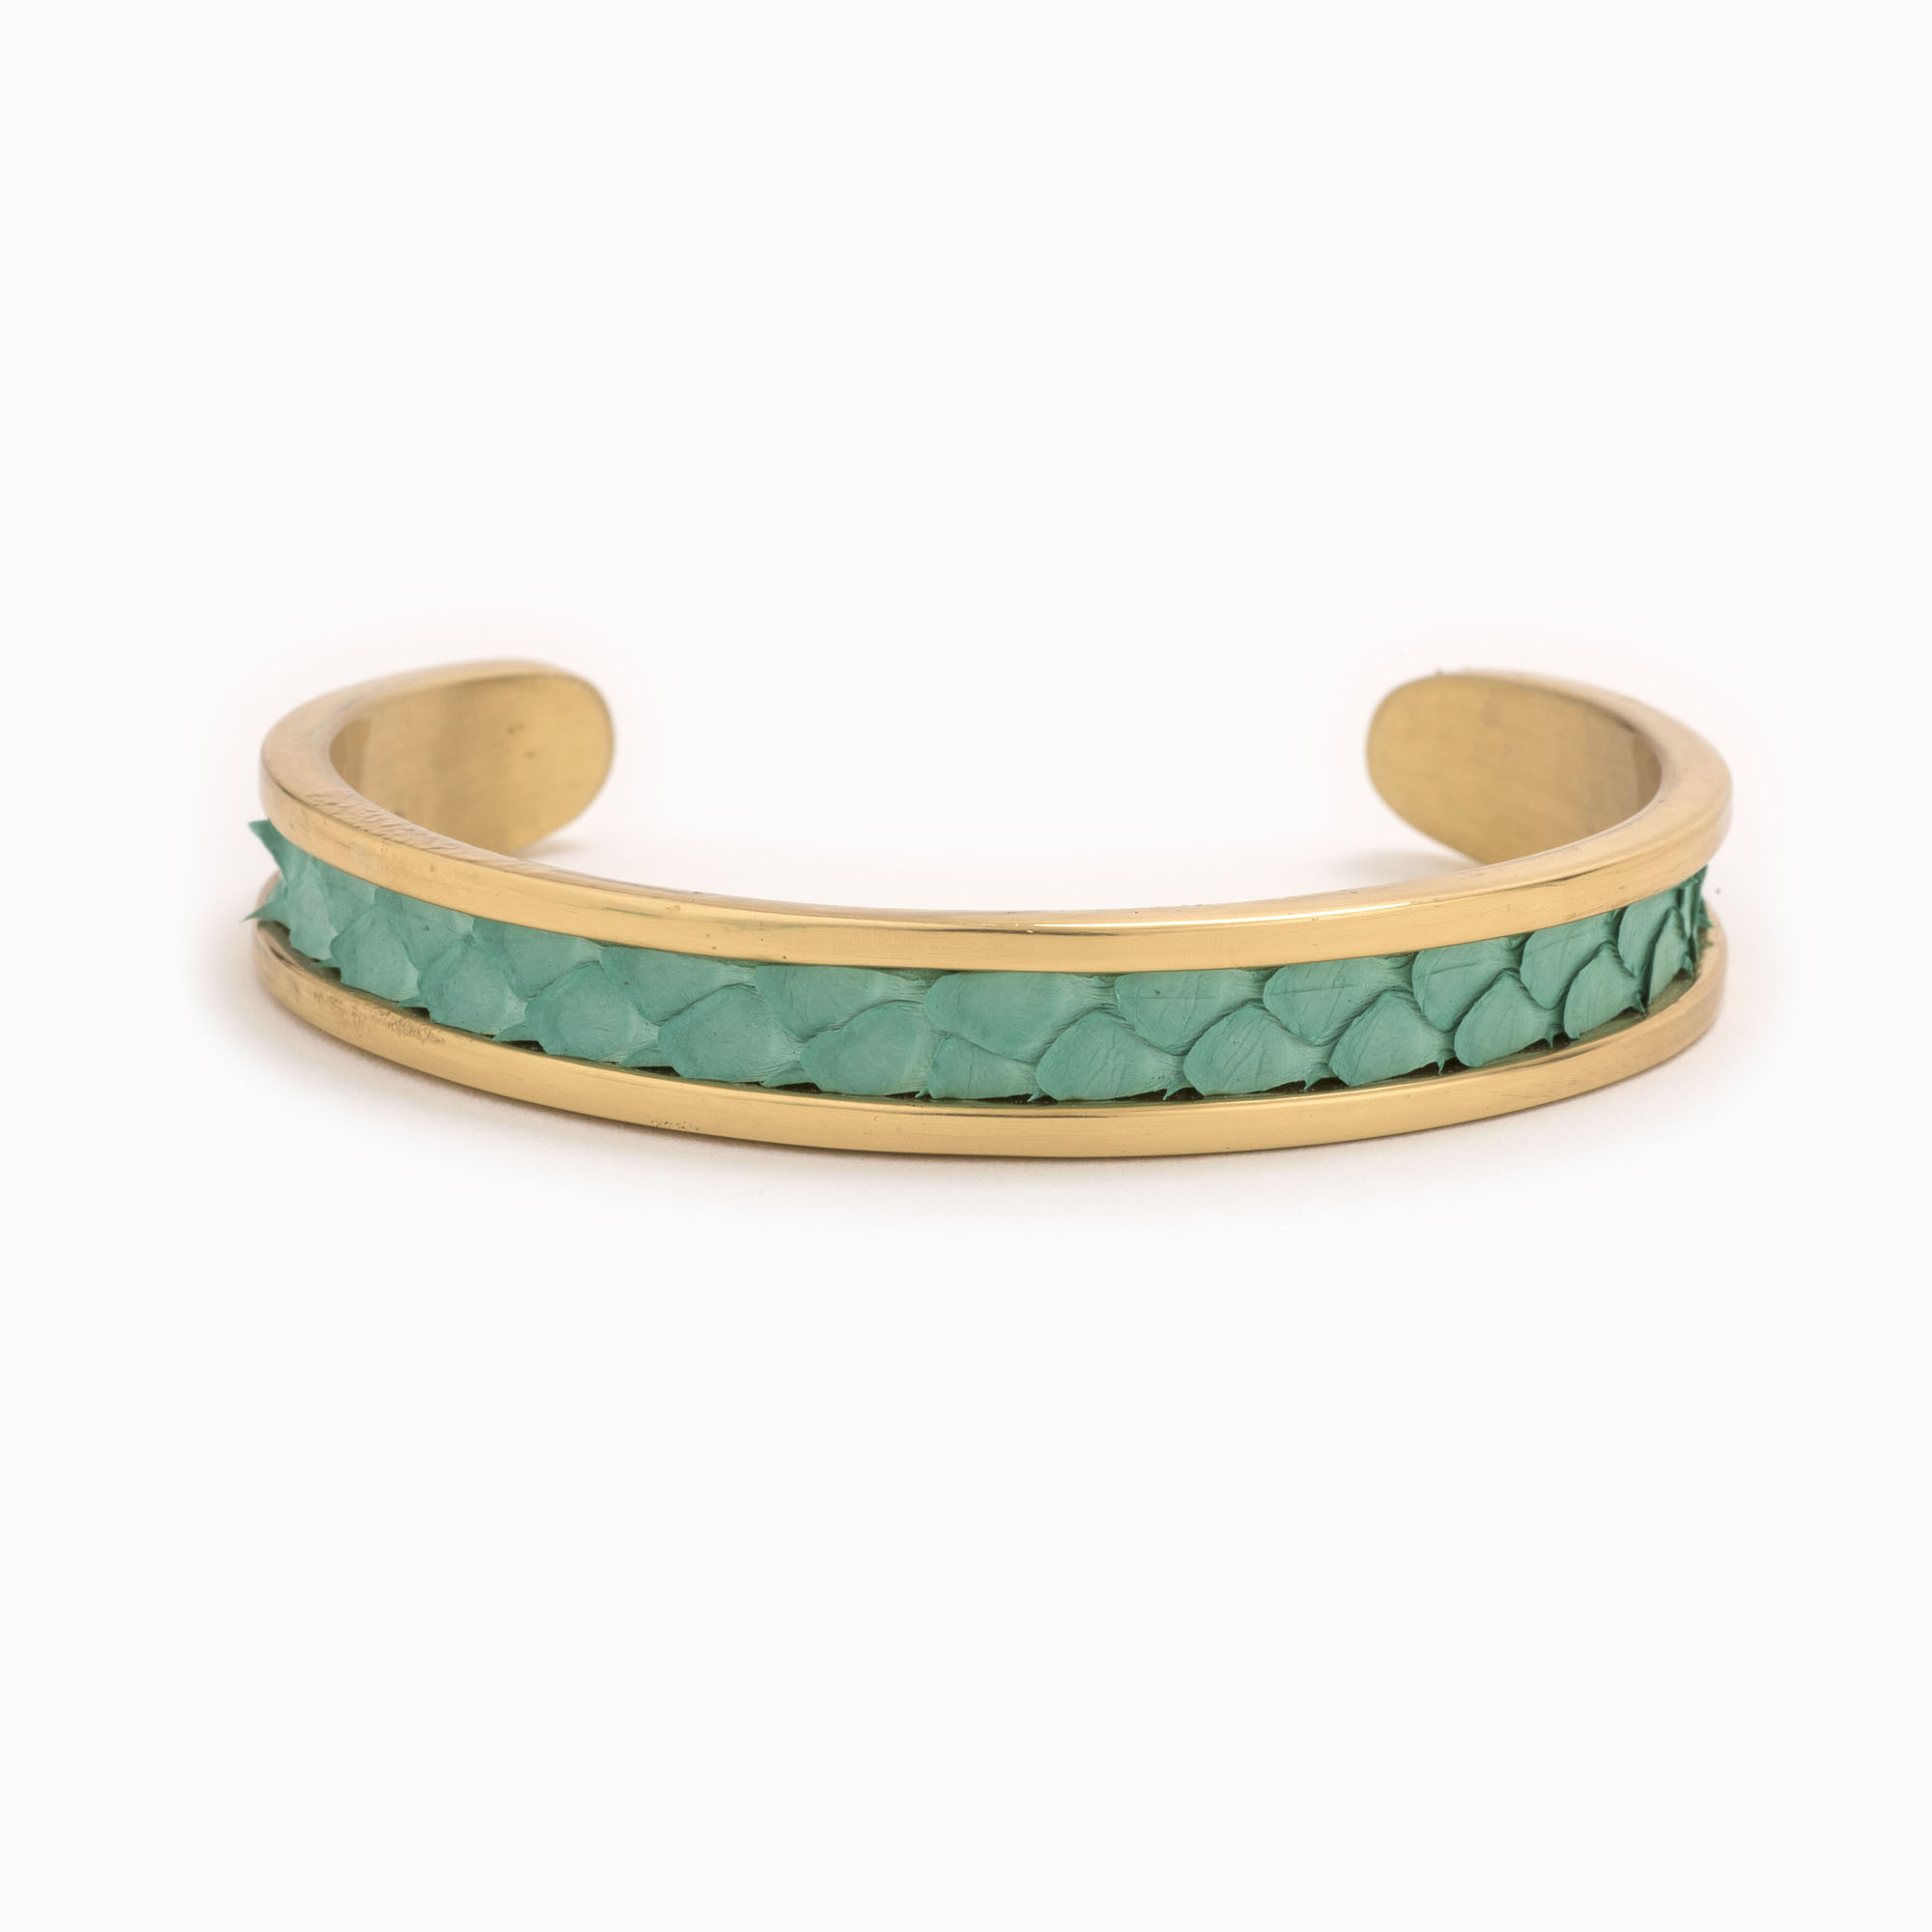 A small gold cuff with turquoise colored snakeskin pattern inlaid.